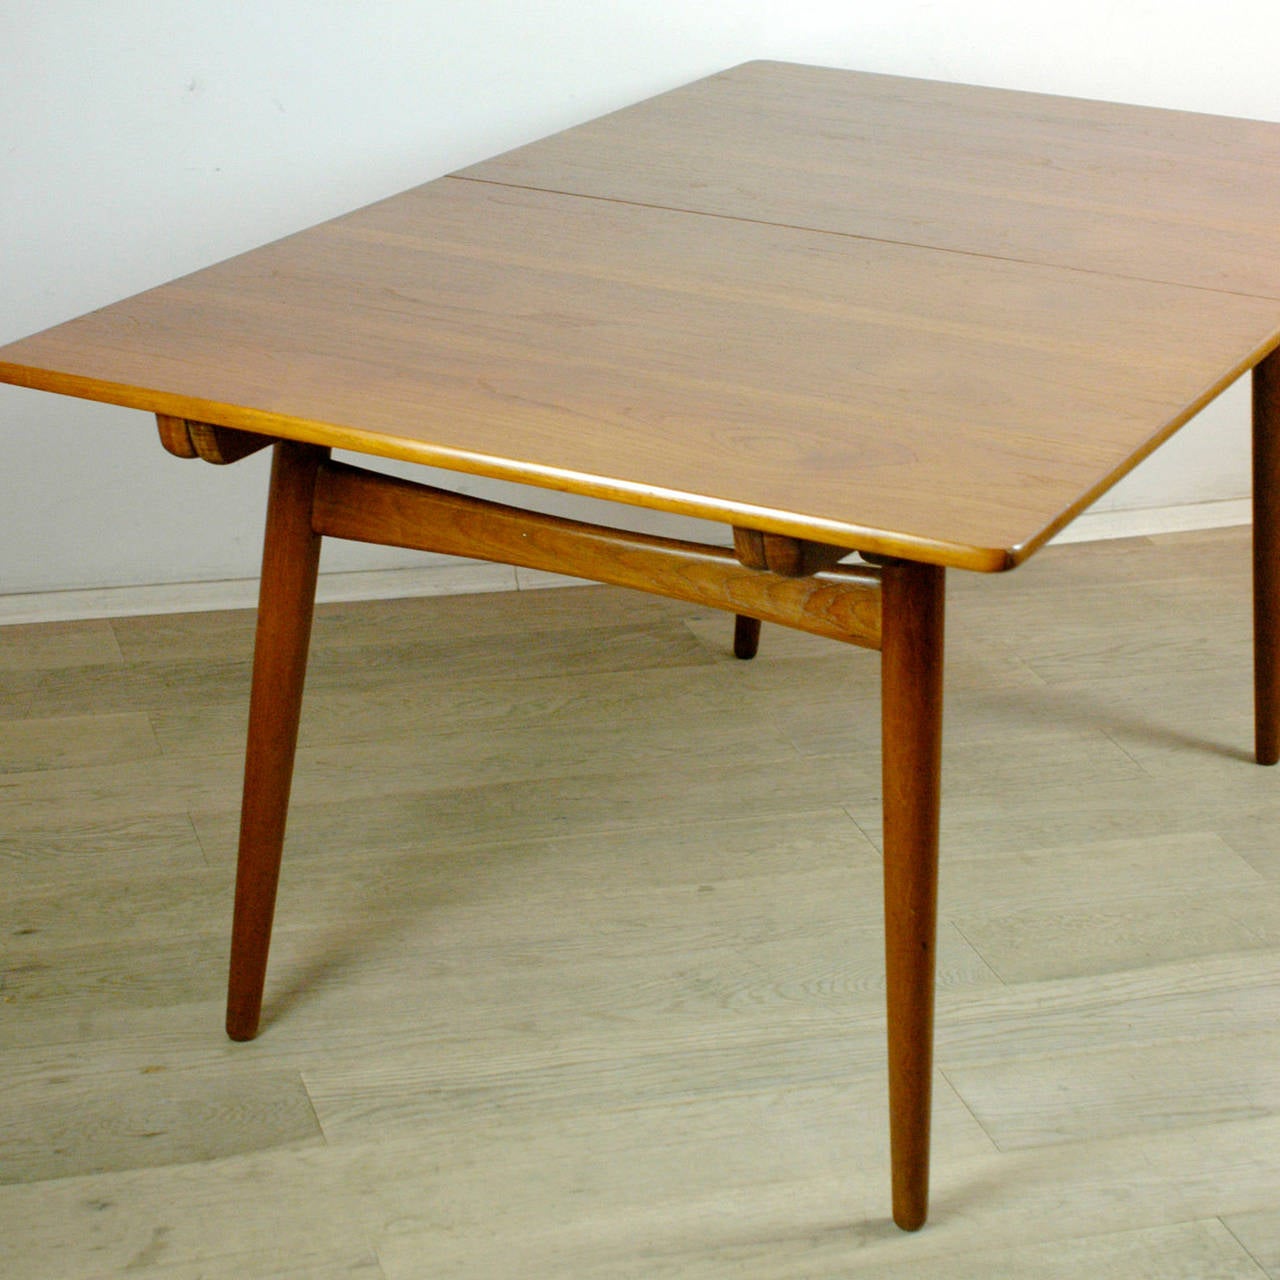 Top quality Scandinavian Modern Teak Dining Table by Hans Wegner.
The two extensions can be stored under the table top.
For up to 10 Persons, extendable up to  240 cm